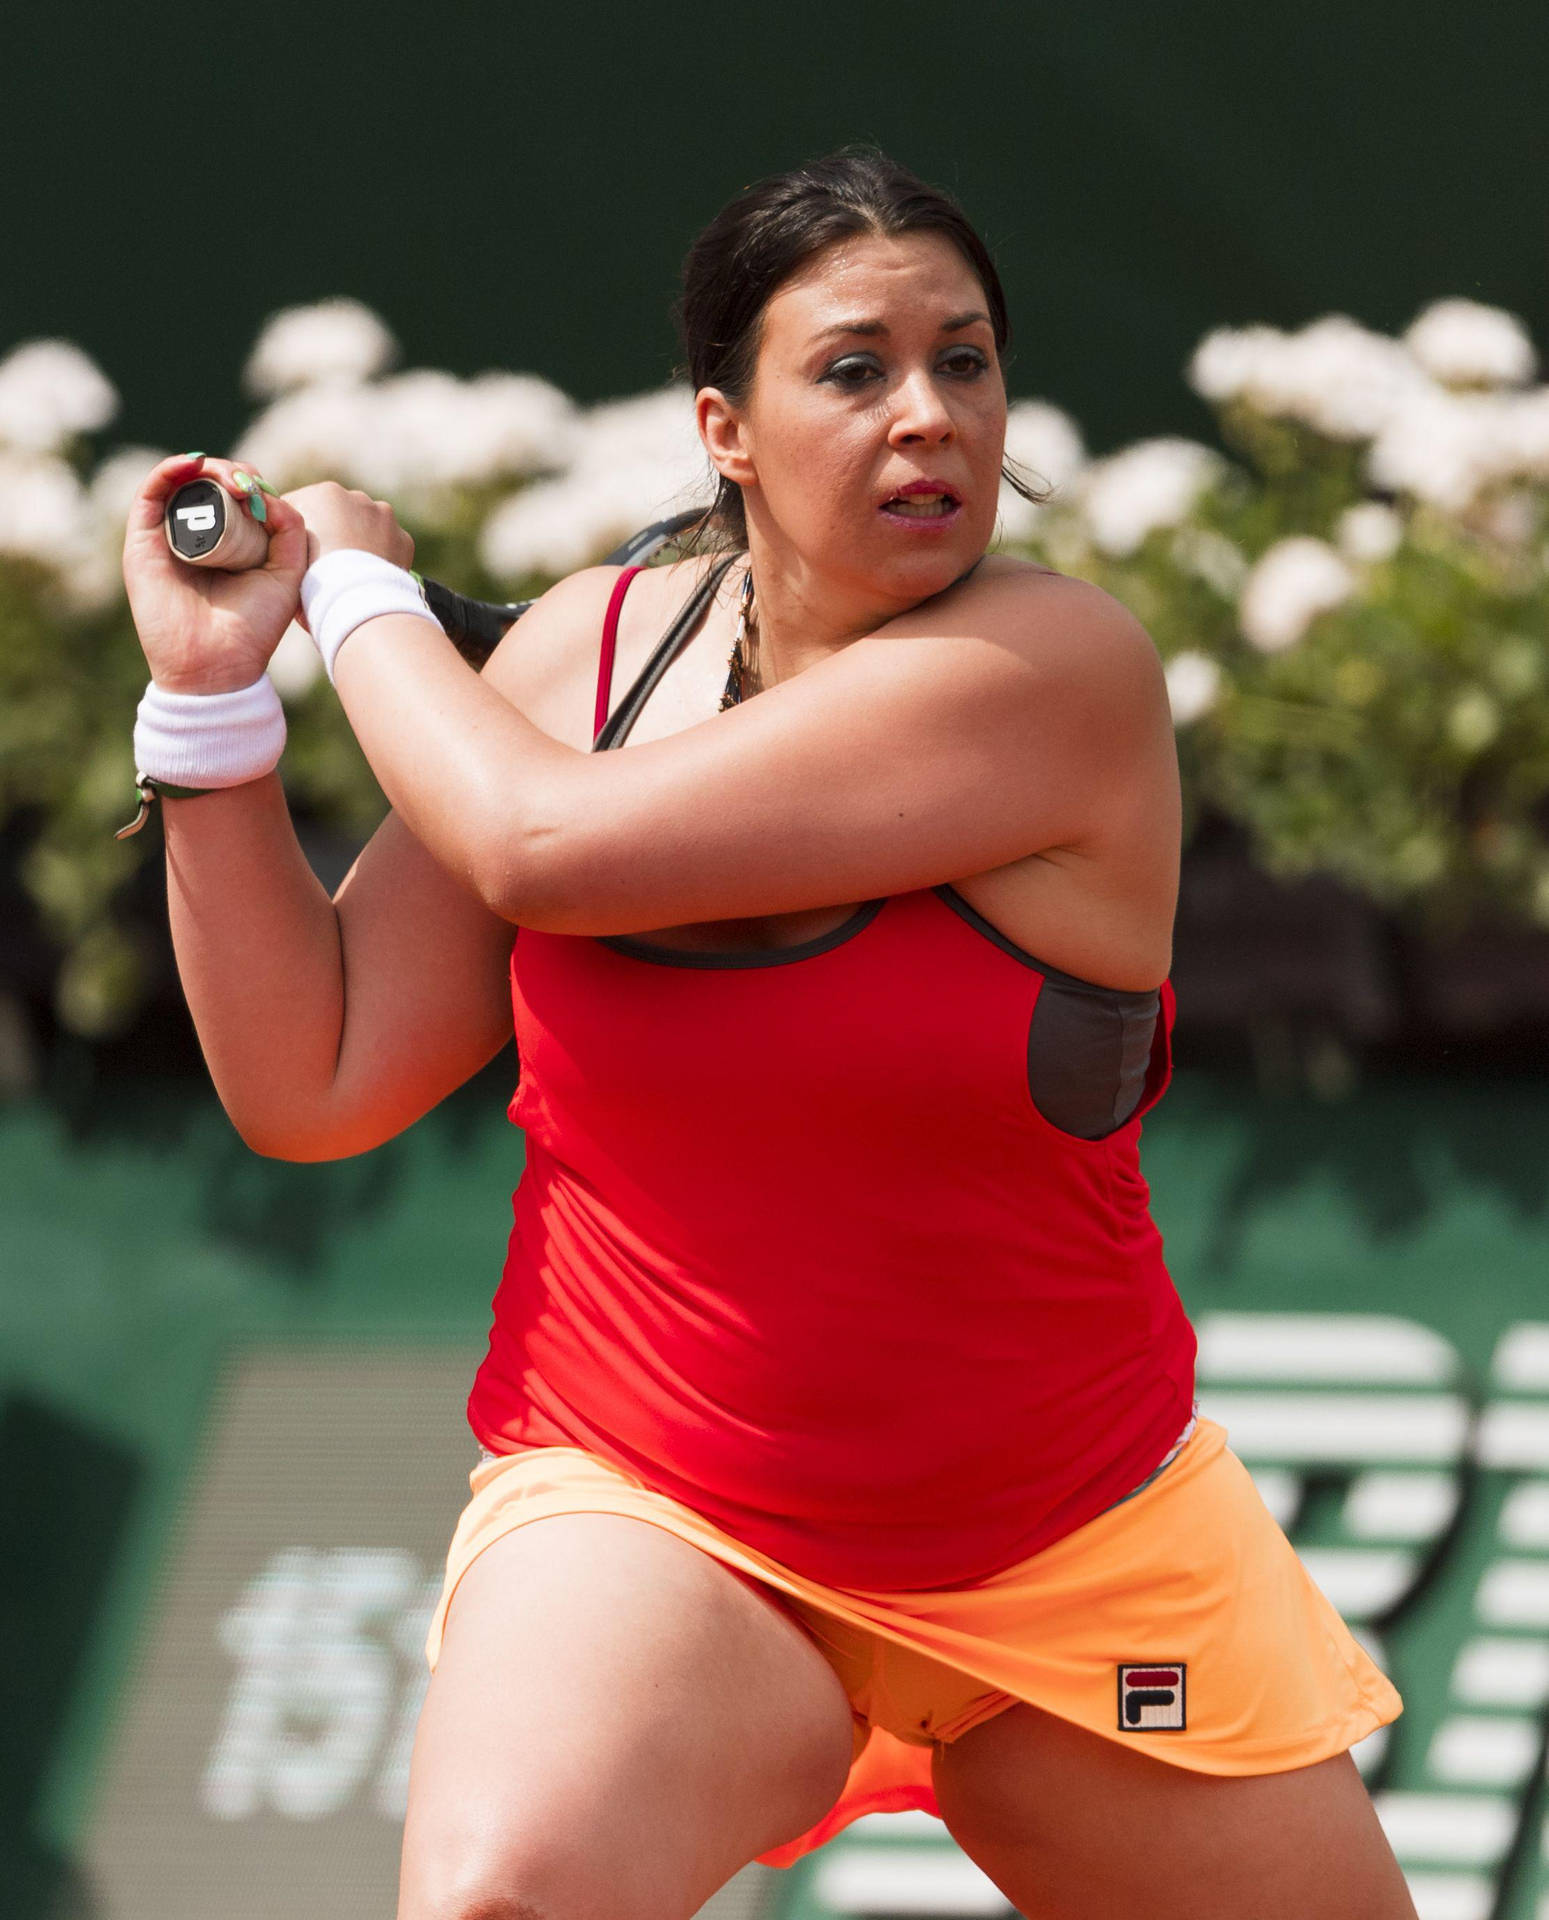 Marion Bartoli during a tennis match in a vibrant red top Wallpaper